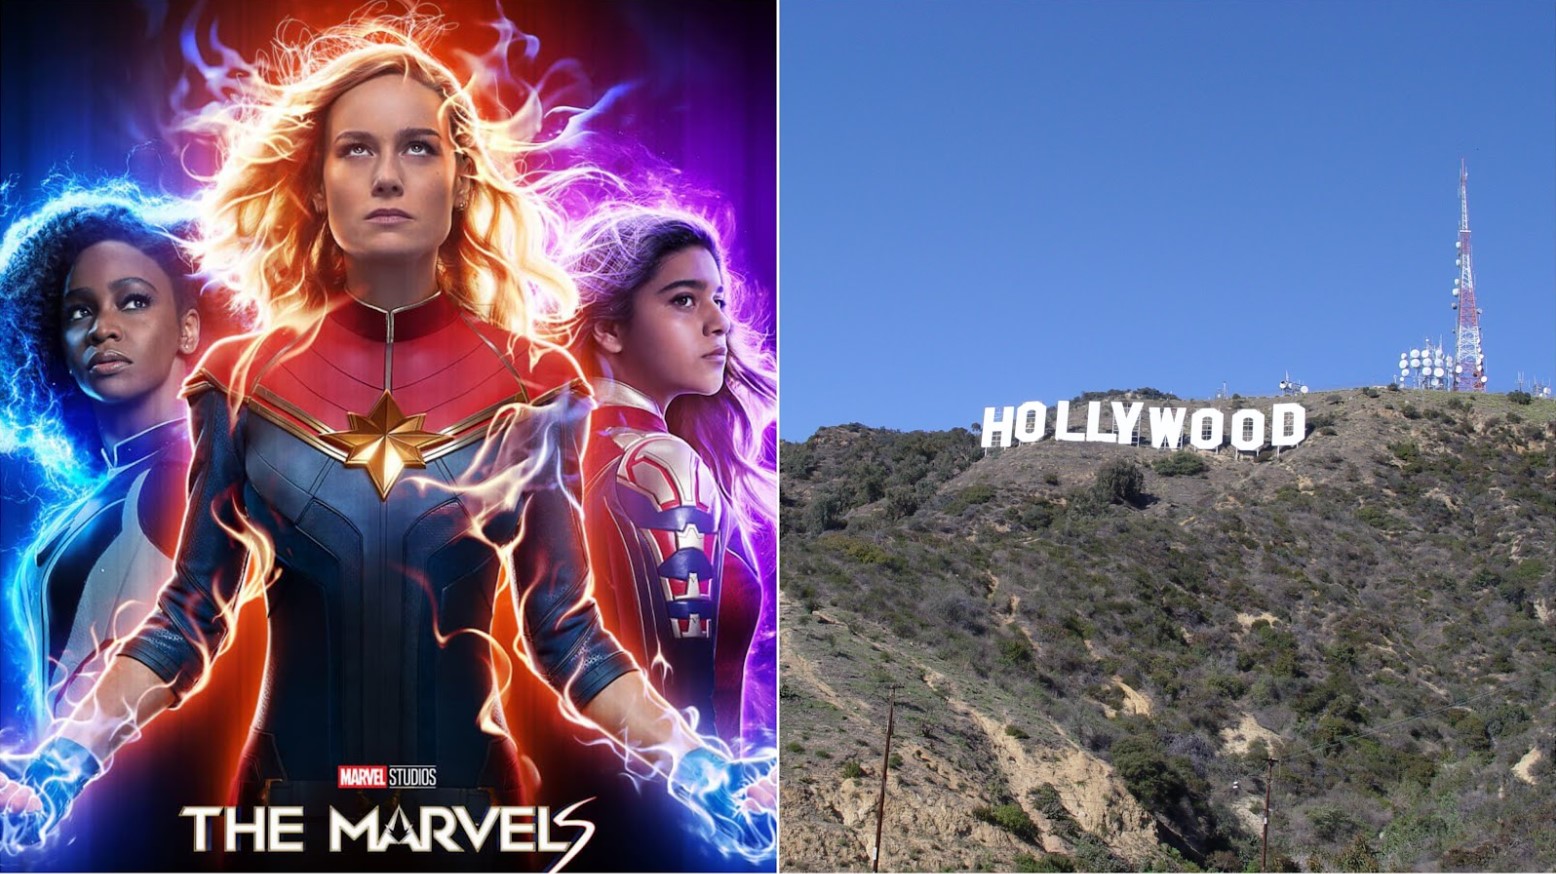 The Marvels Movie Poster and a picture of Hollywood